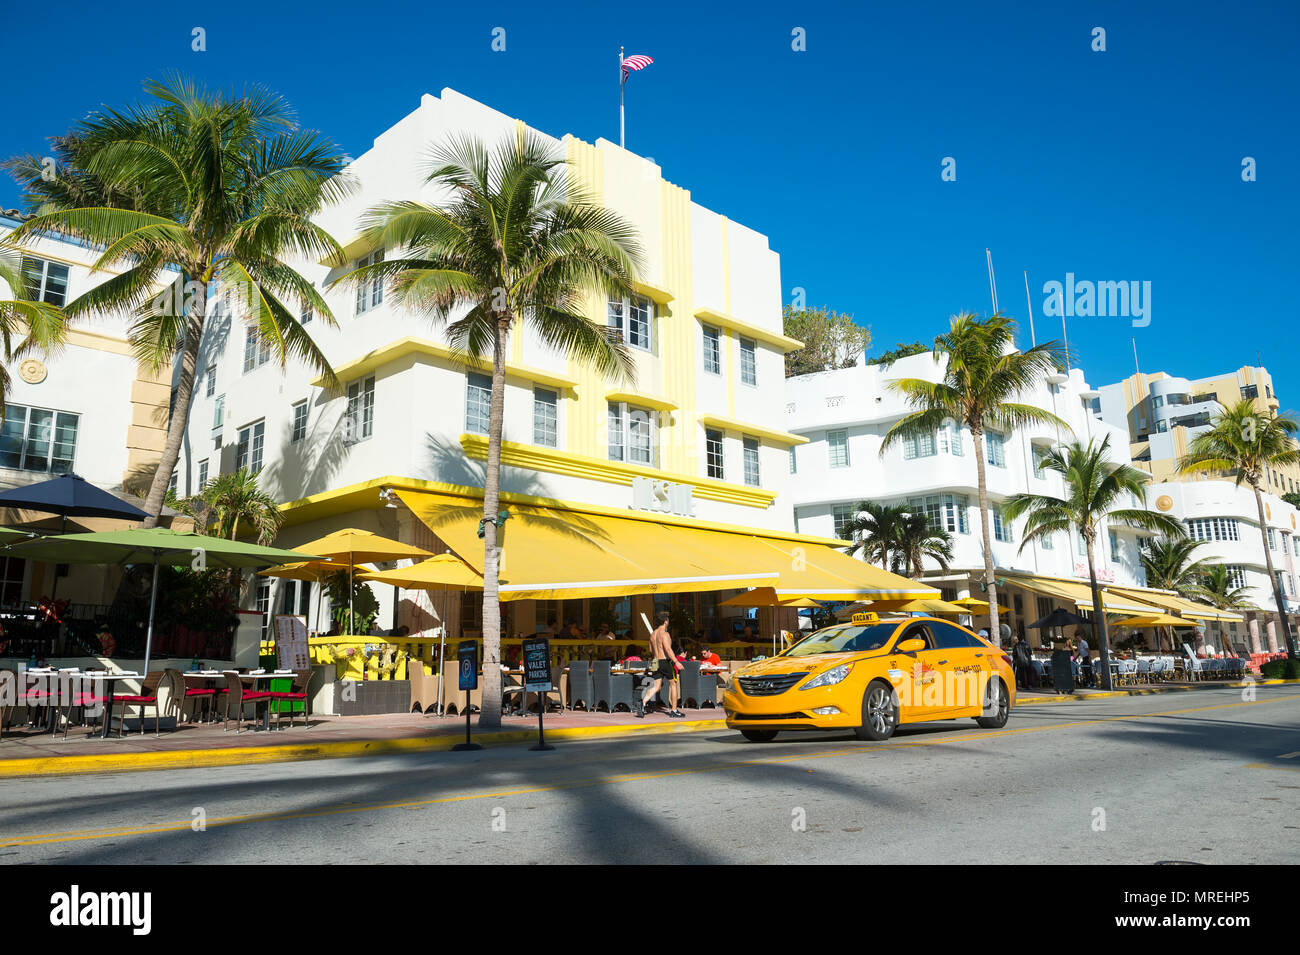 MIAMI - JANUARY 12, 2018: Restaurants on the tourist strip of Ocean Drive stand ready for morning customers in South Beaches a taxi drives past. Stock Photo